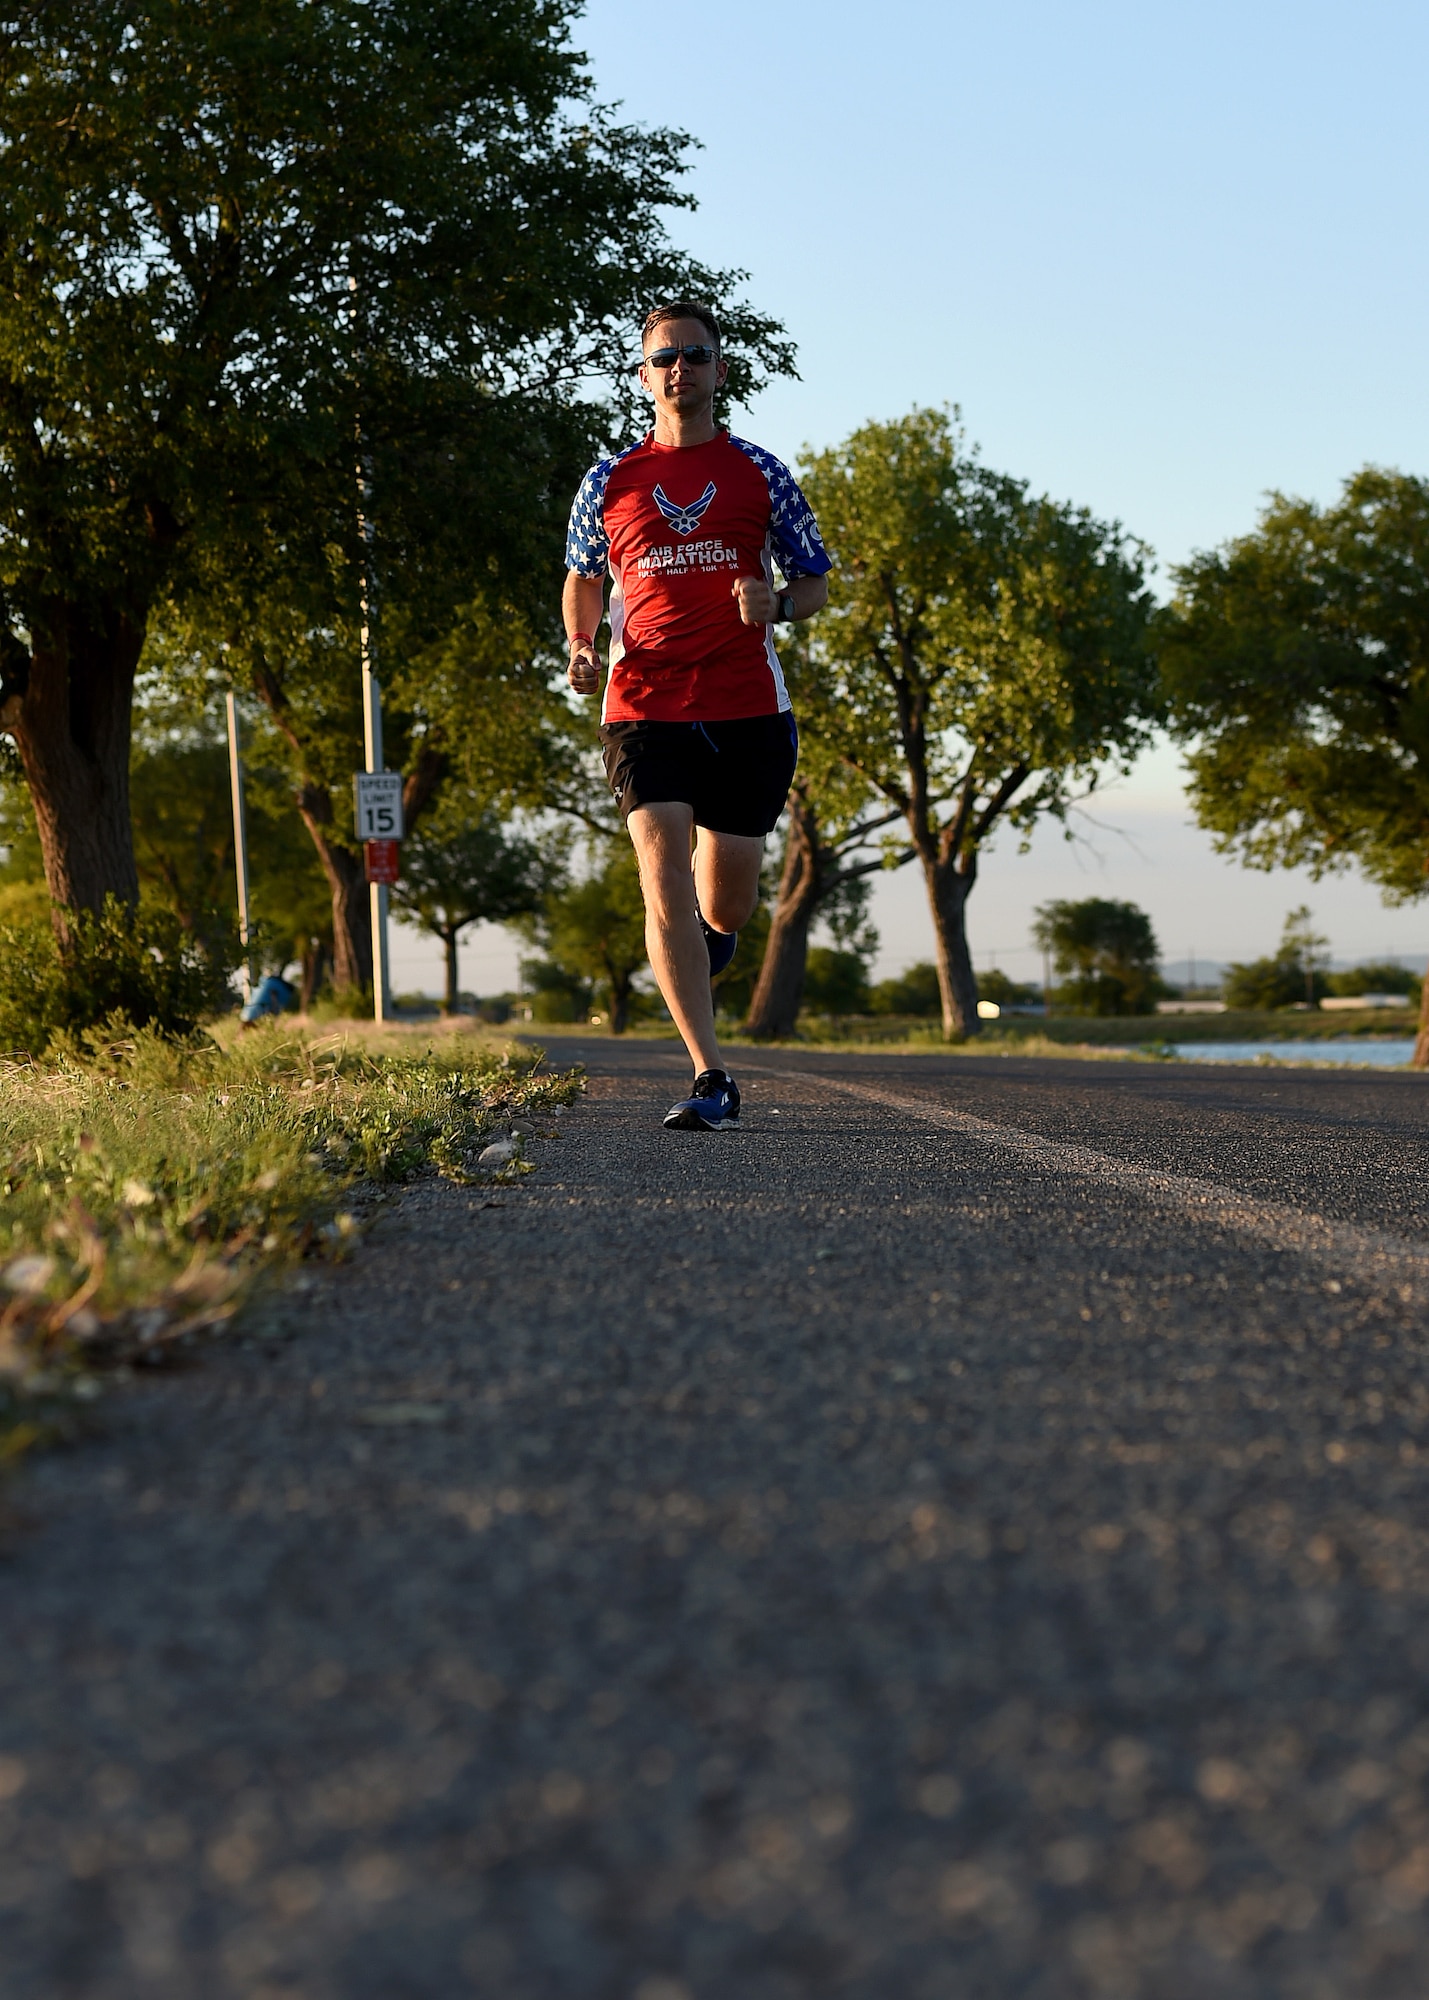 U.S. Air Force Tech. Sgt. Logan Berry, 54th Air Refueling Squadron instructor boom operator, paces himself while running, July 20, 2017 at Altus, Oklahoma. After an unsuccessful running portion of a physical training test, Berry motivated himself to become a better runner and has competed in several long-distance running events, including the Air Force Marathon. (U.S. Air Force photo by Senior Airman Kirby Turbak/Released)